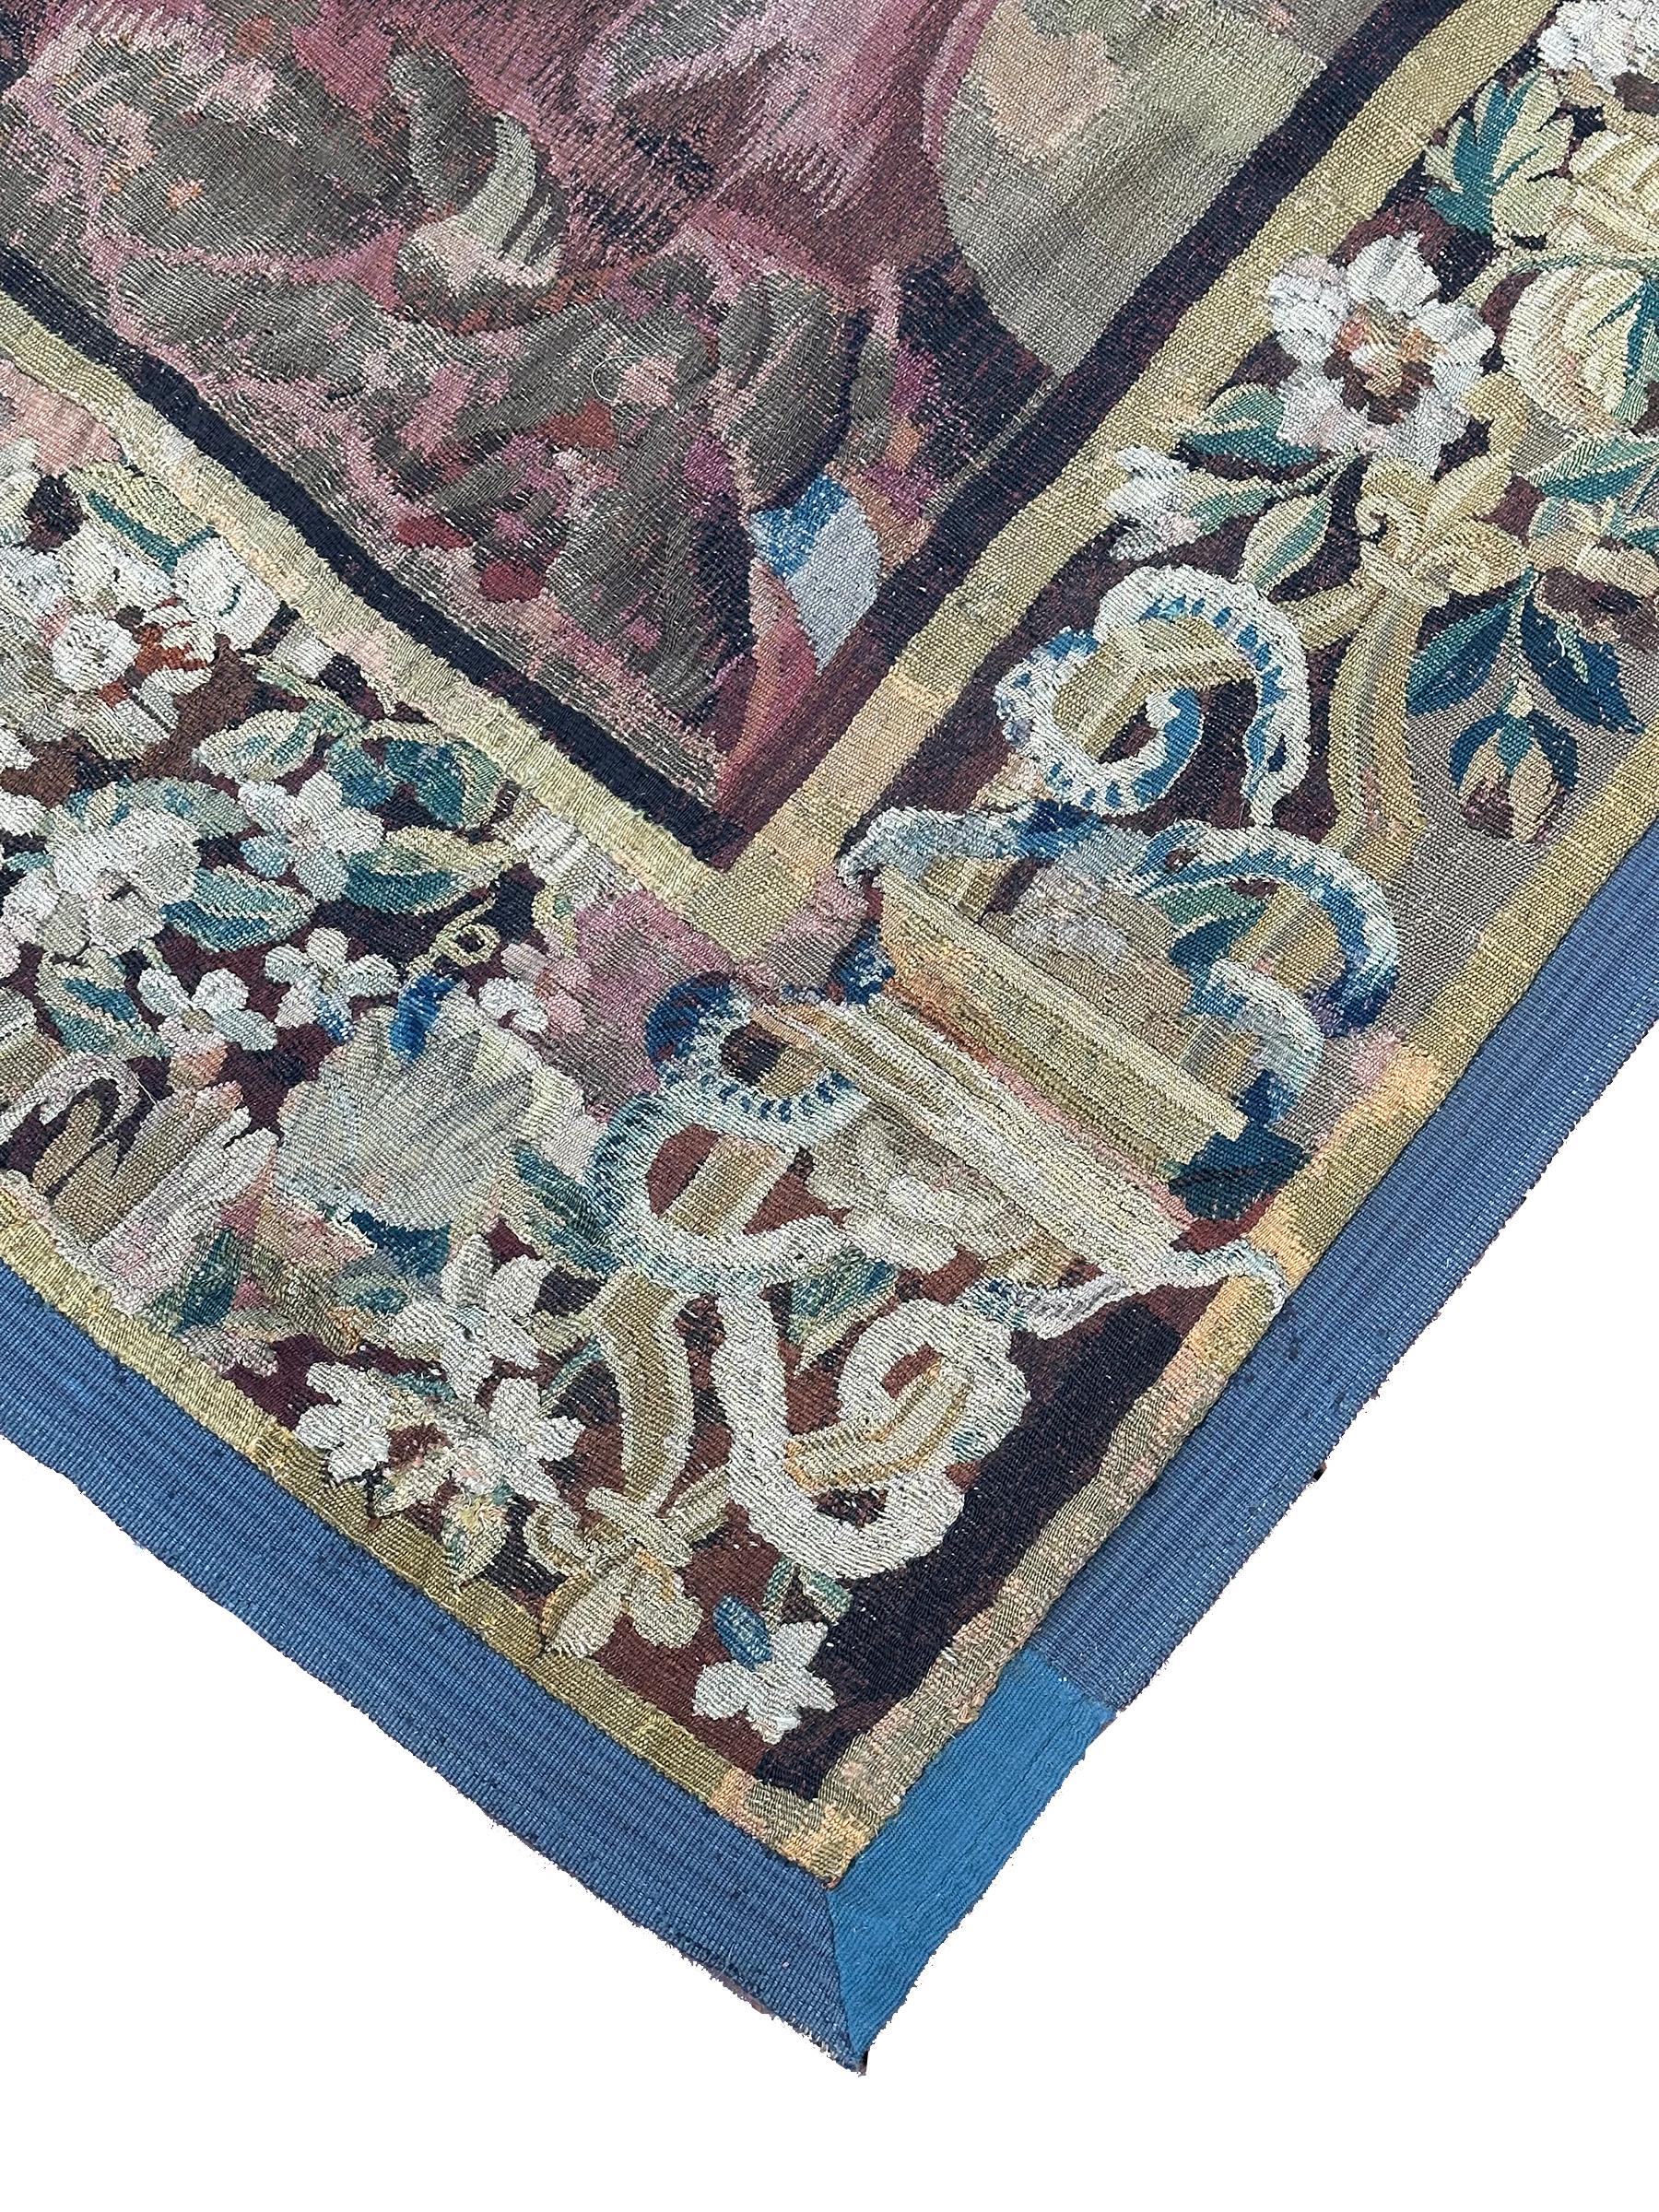 Early 18th century Flemish antique tapestry 10x13 Verdure Wool & Silk 297x384cm For Sale 11